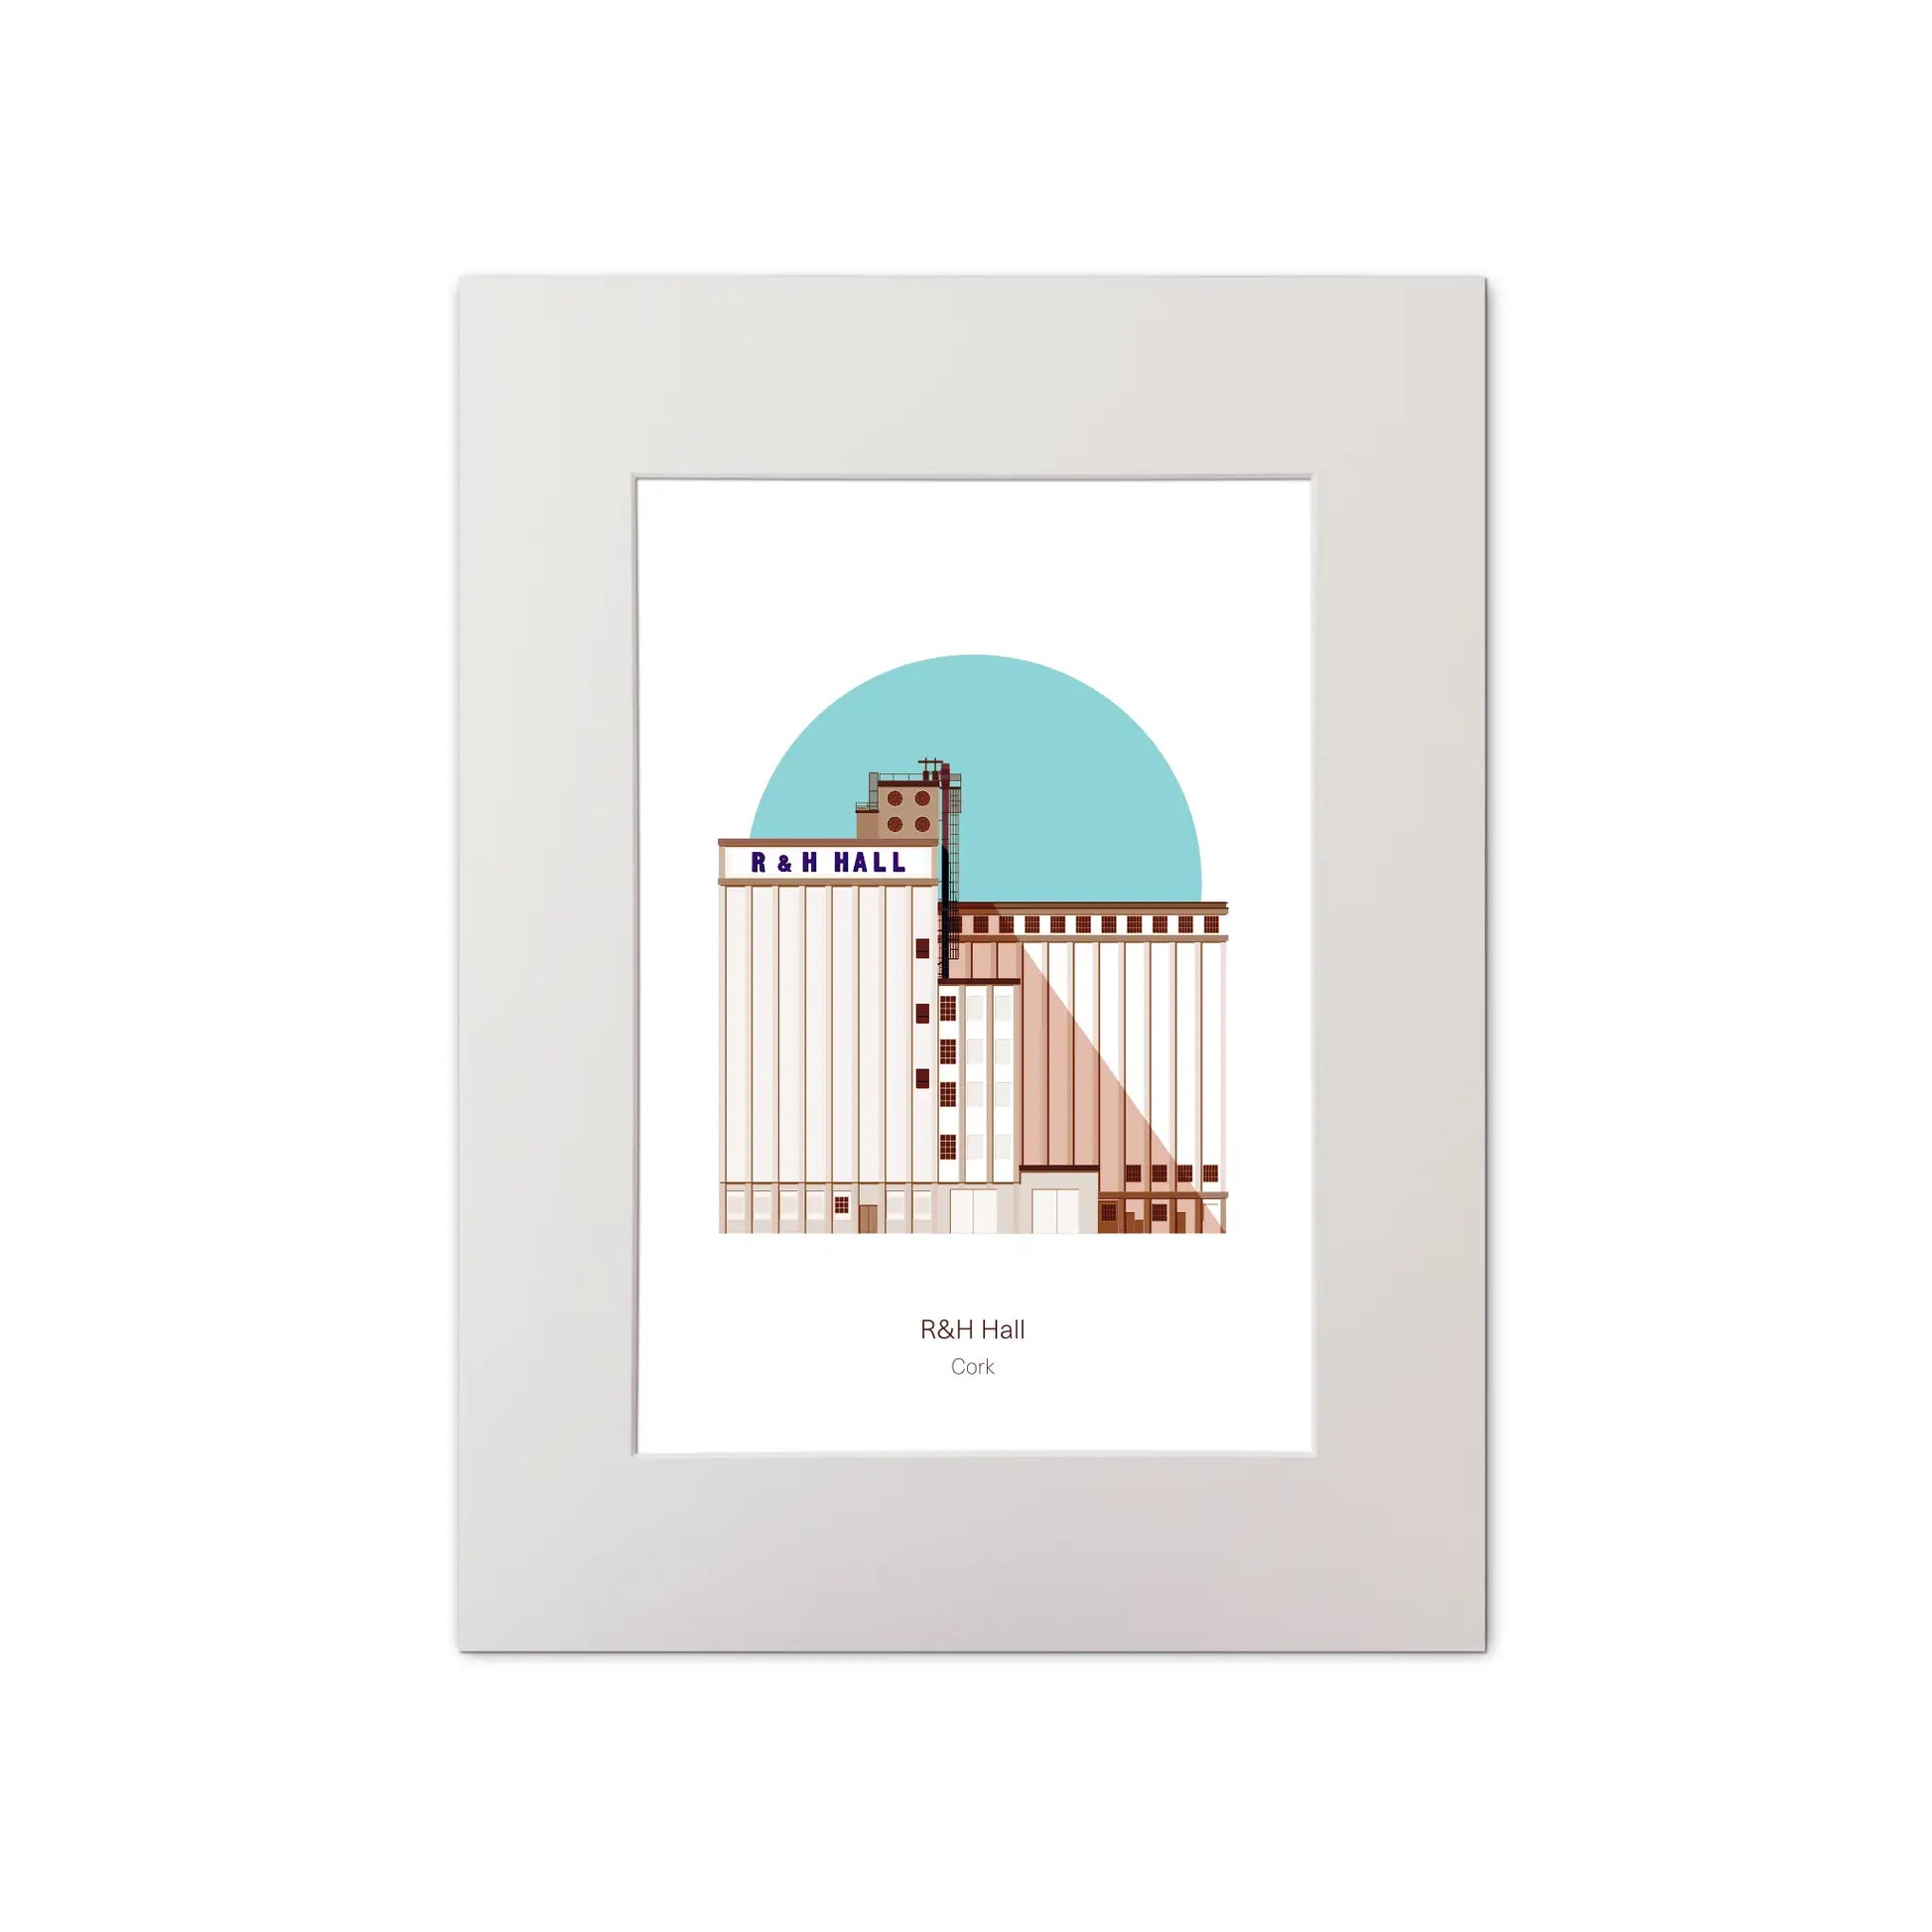 Mounted modren stylised art print of R&H Hall in Port of Cork, with blue background.